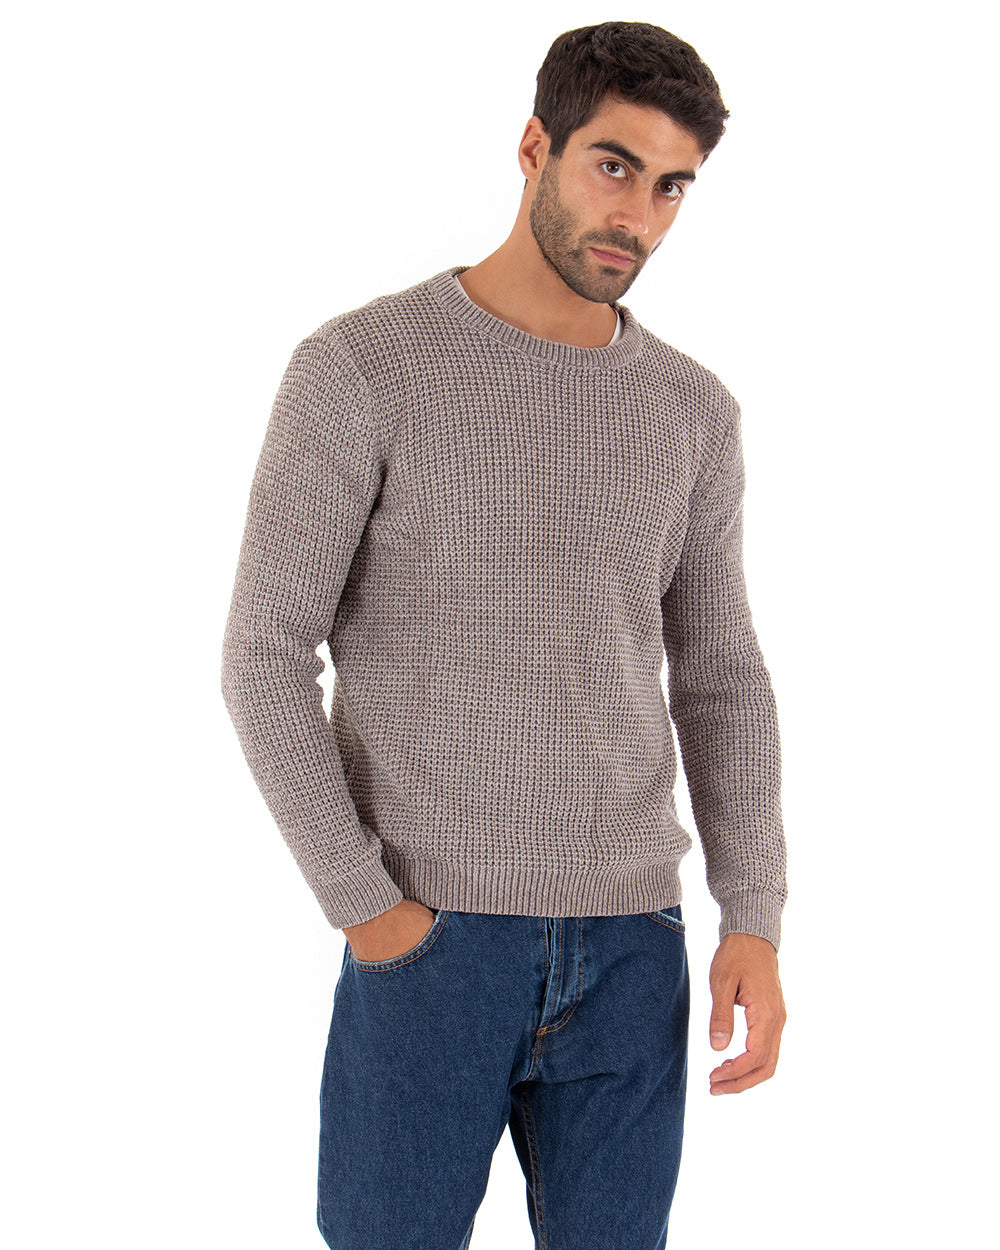 Men's Sweater Long Sleeves Chenille Solid Color Mud Round Neck GIOSAL